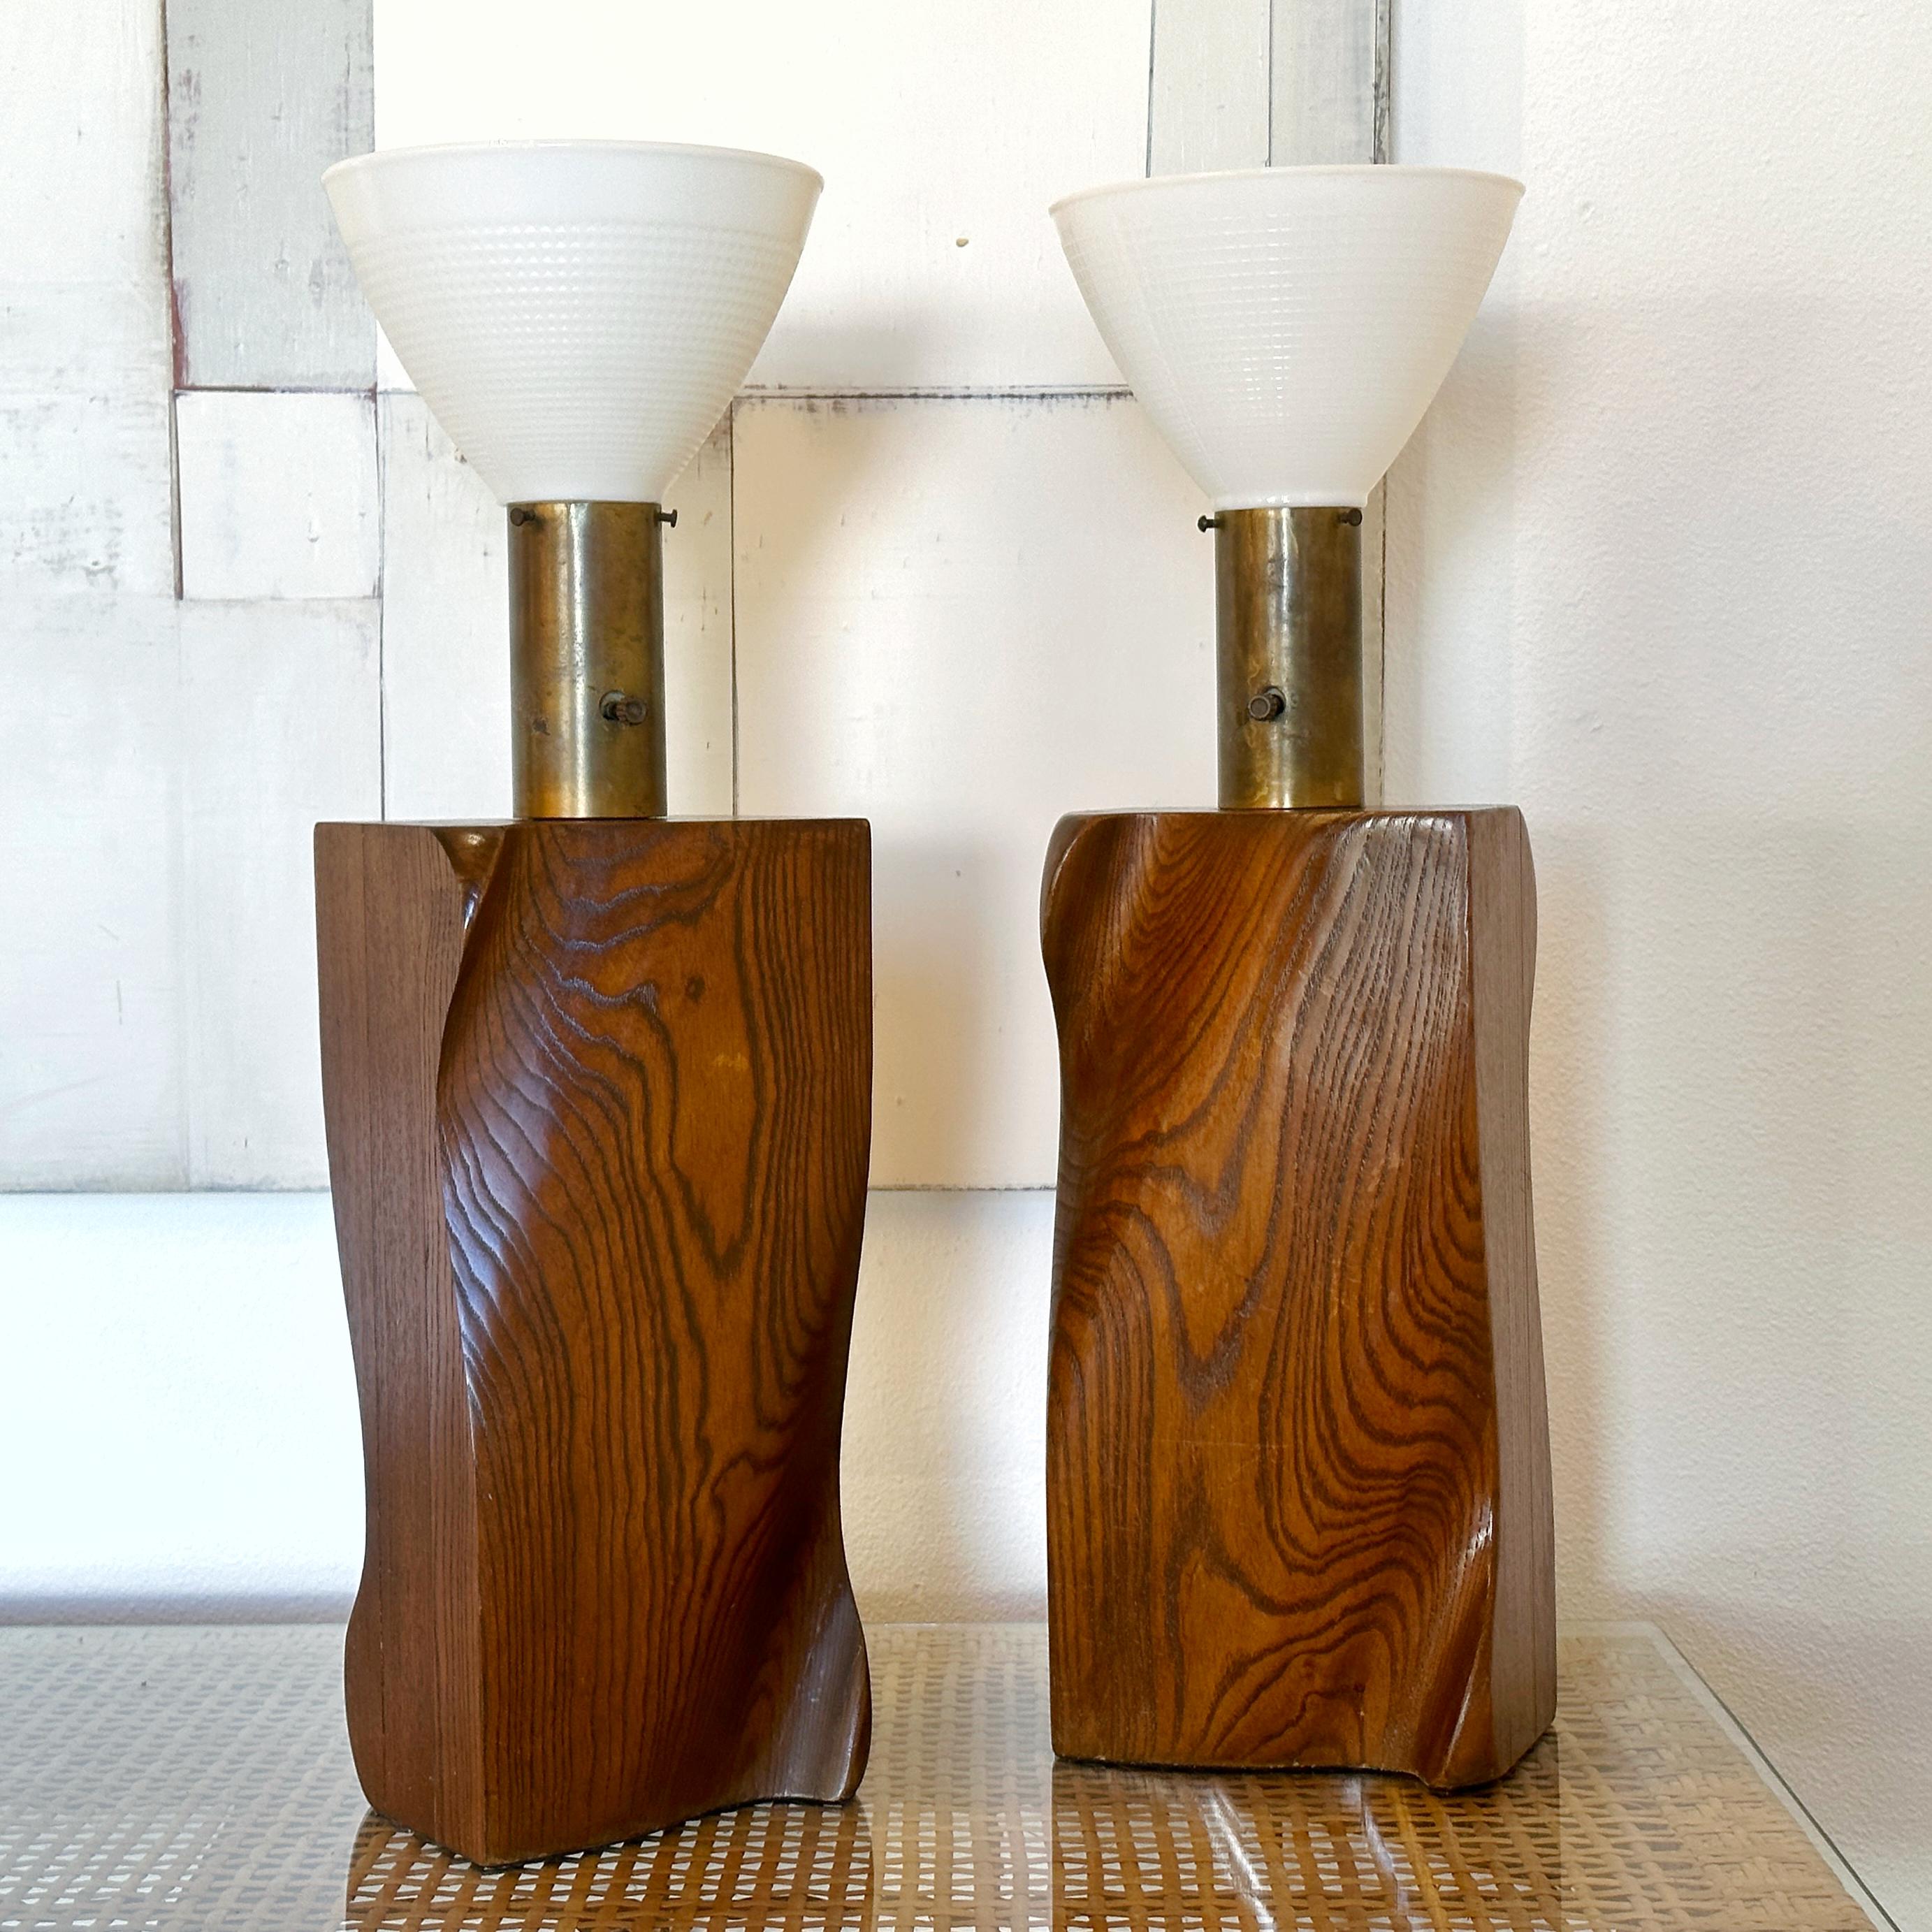 Organic Modern Yasha Heifetz Pair Sculptural Walnut Table Lamps, ca late 1940s / early 50s For Sale